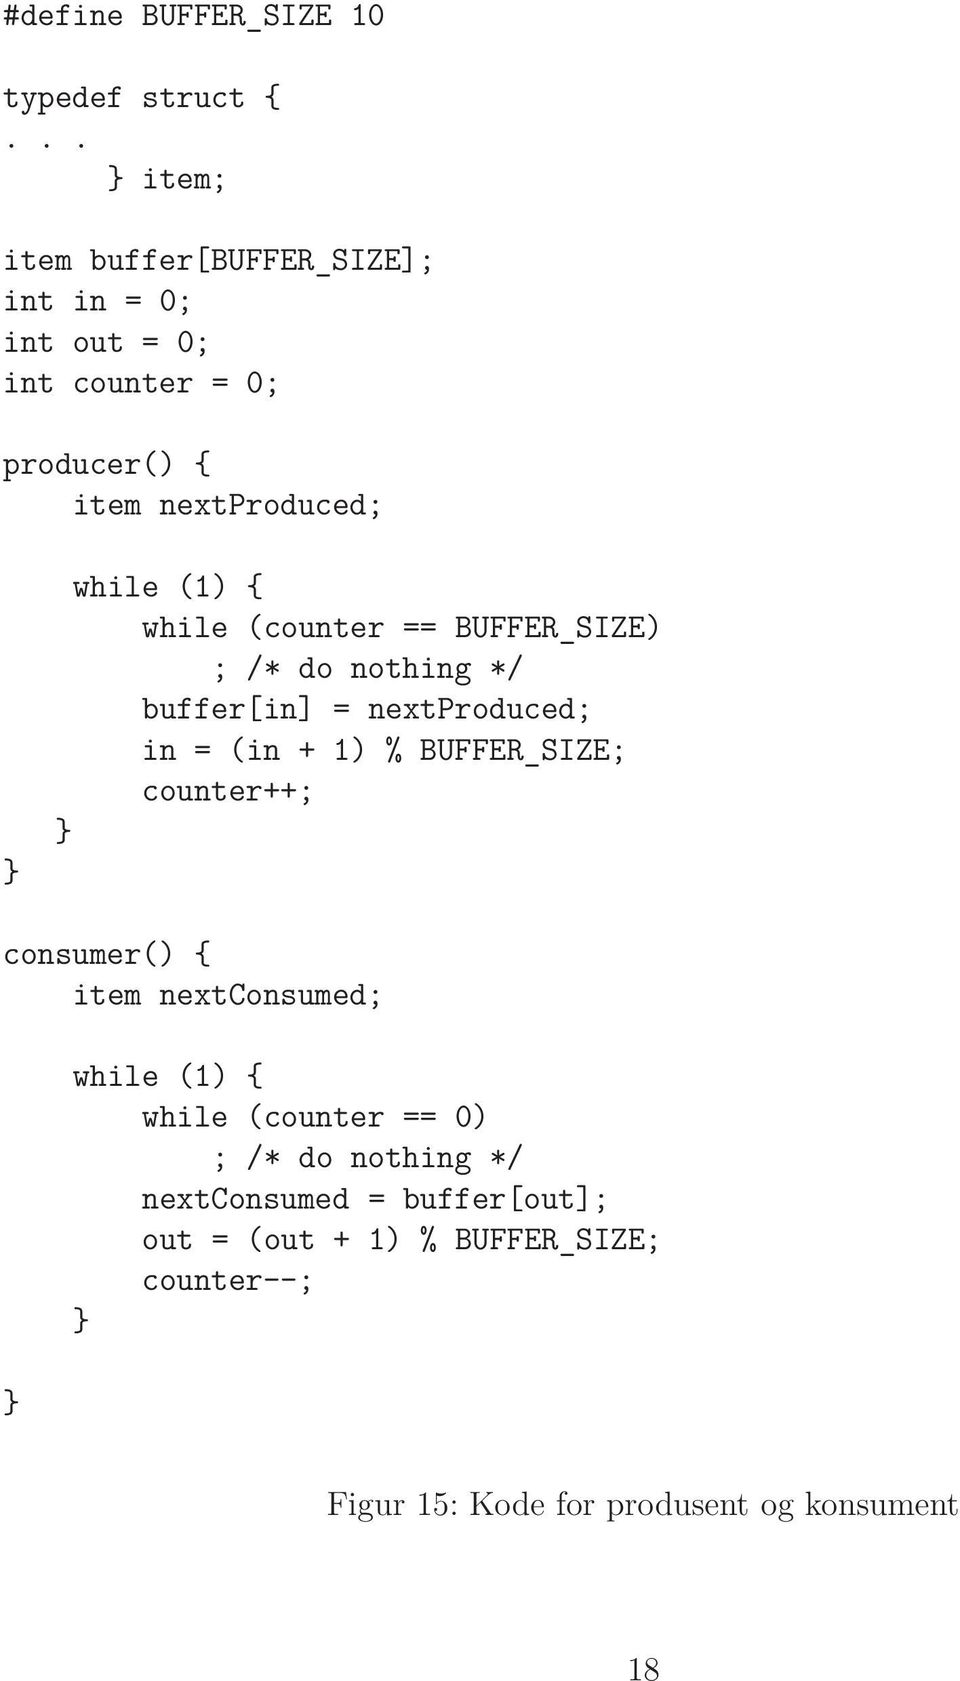 { while (counter == BUFFER_SIZE) ; /* do nothing */ buffer[in] = nextproduced; in = (in + 1) % BUFFER_SIZE; counter++;